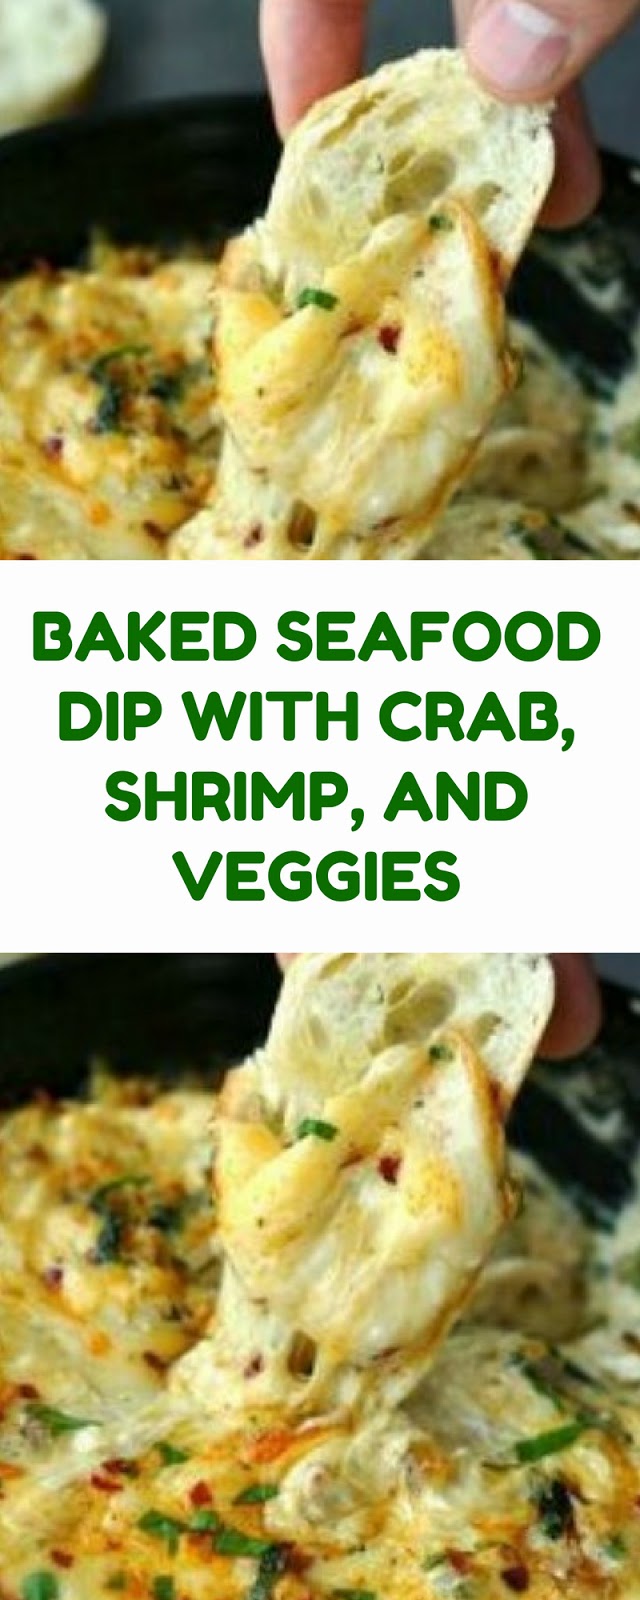 BAKED SEAFOOD DIP WITH CRAB, SHRIMP, AND VEGGIES